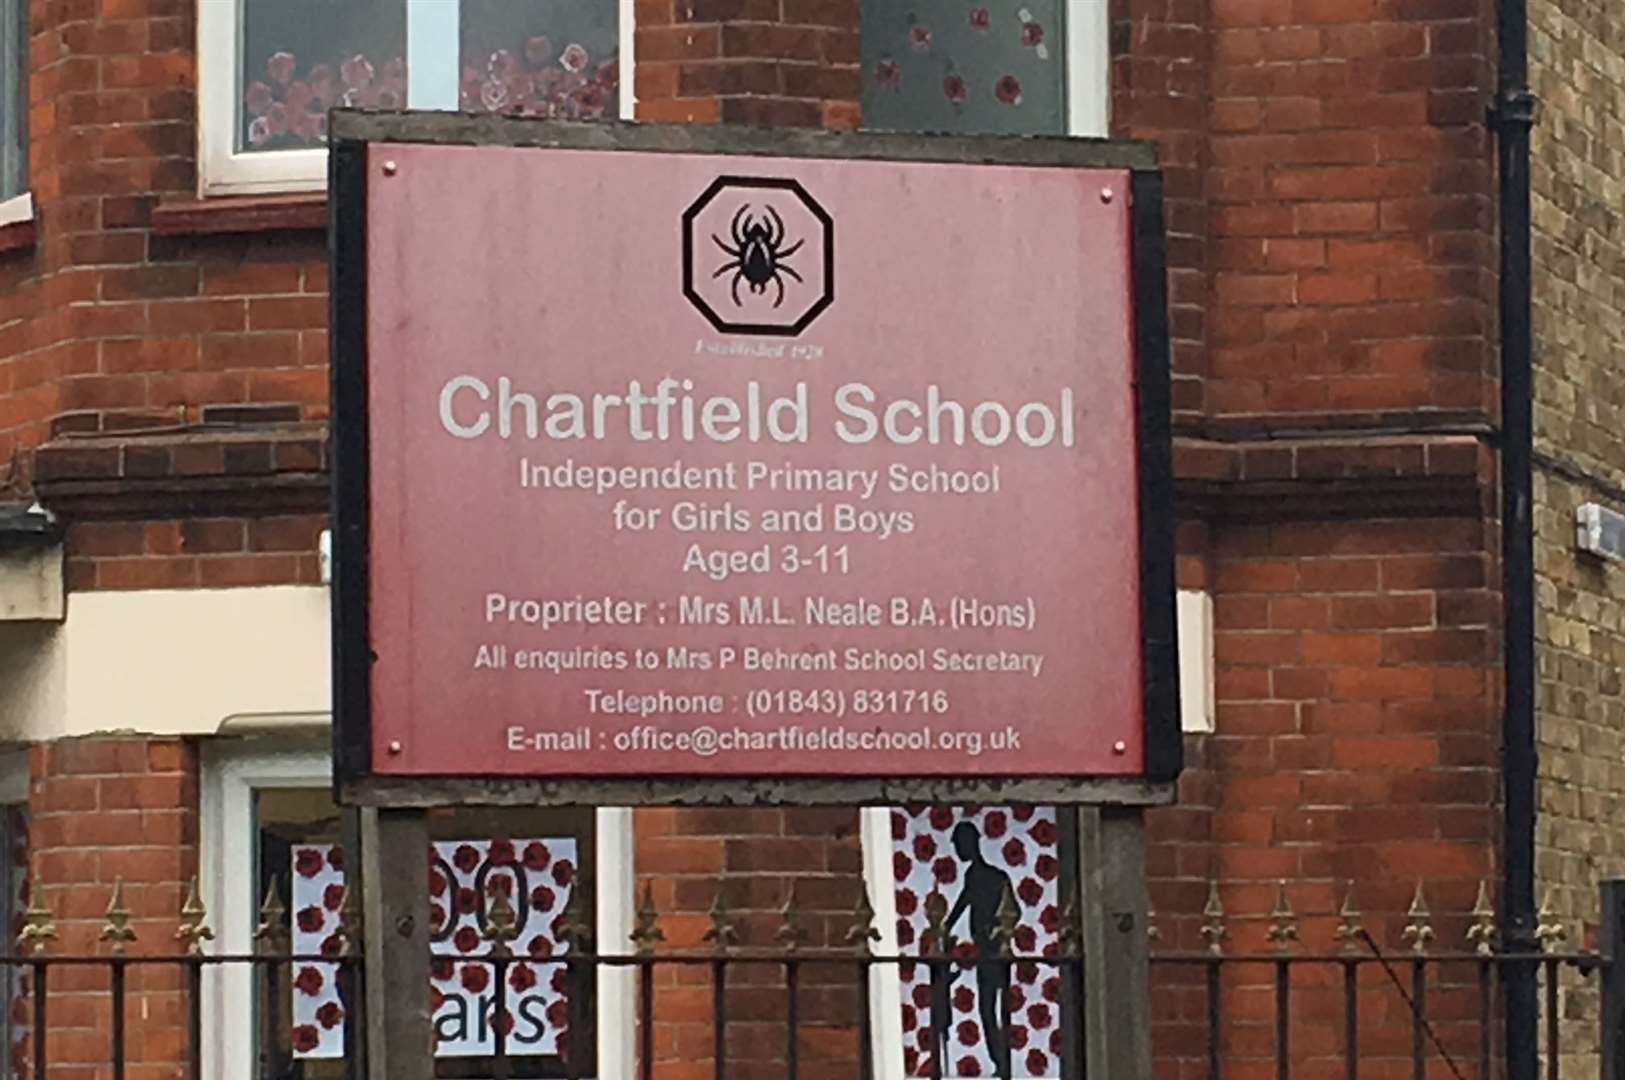 Chartfield School in Westgate-on-Sea has been given a 'requires improvement' rating by Ofsted